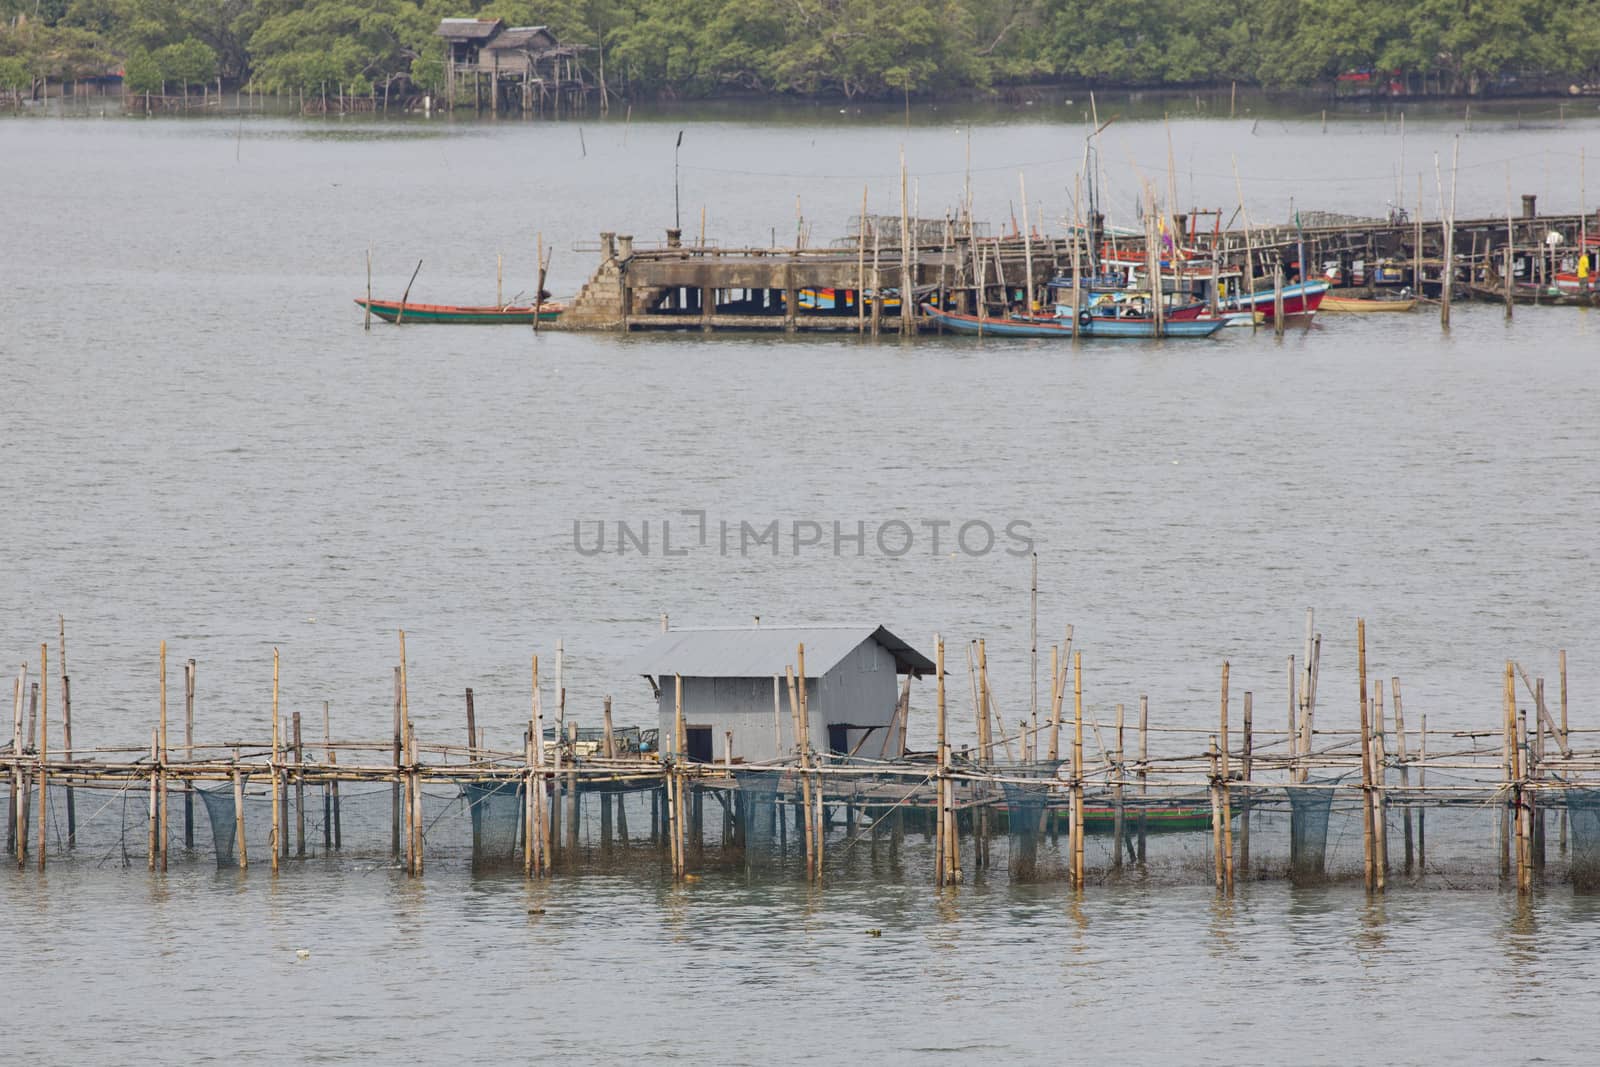 The coop for feeding fish in east of Thailand sea.